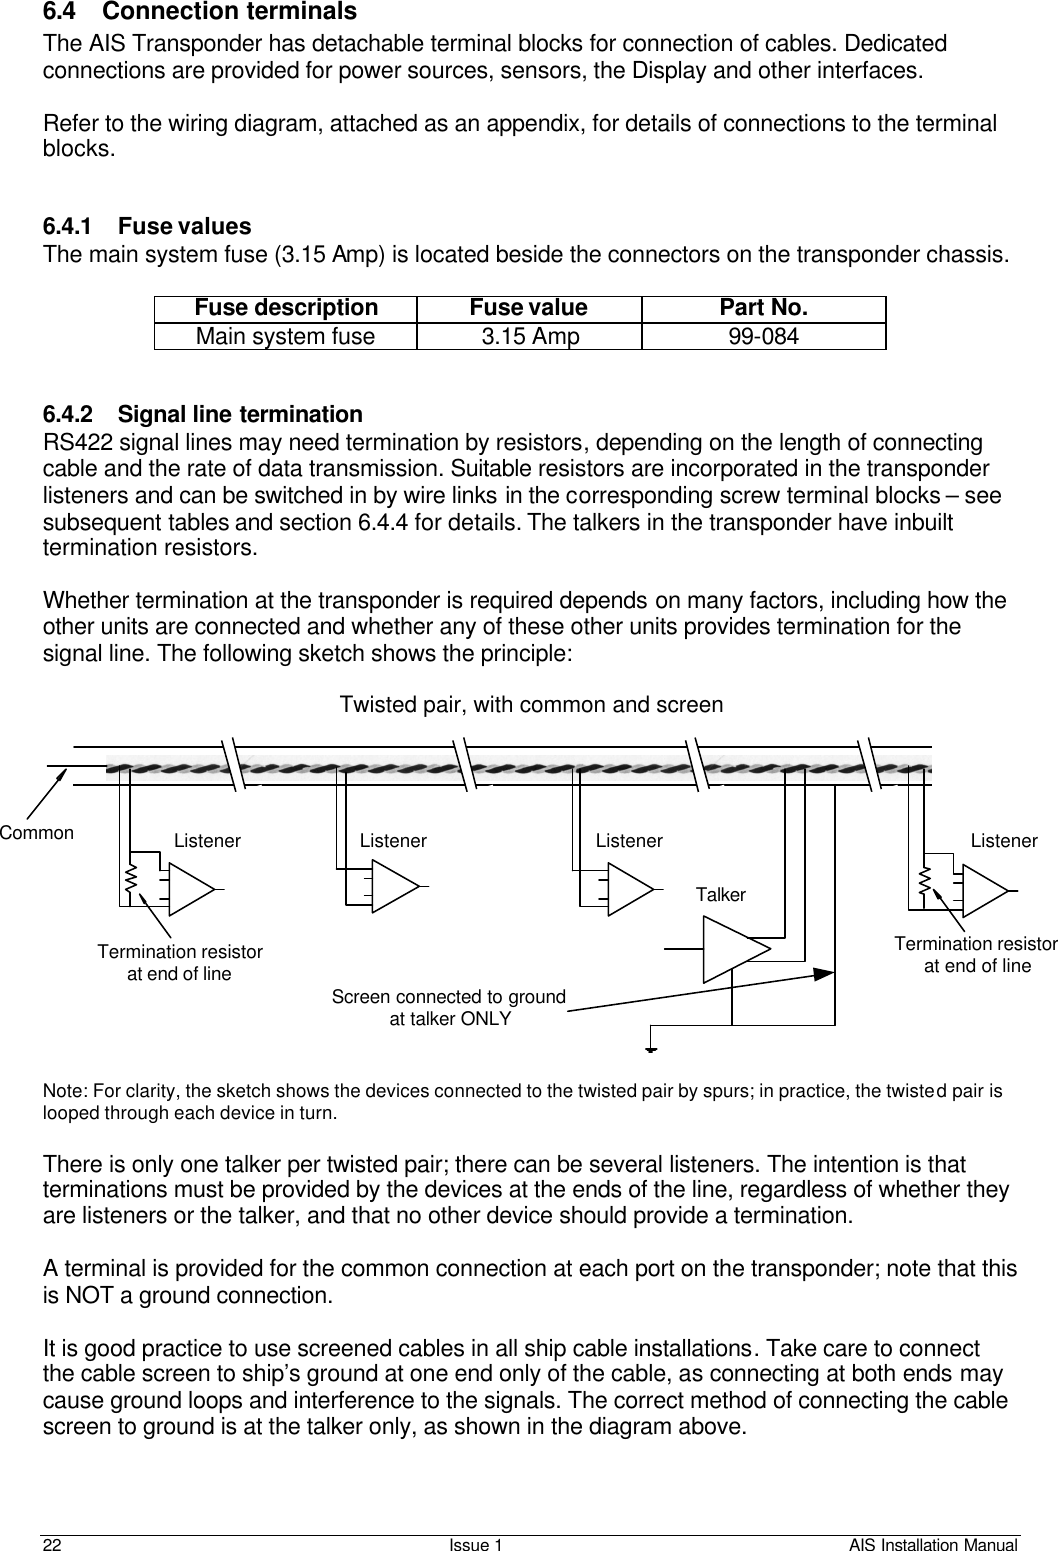    22 Issue 1 AIS Installation Manual 6.4 Connection terminals  The AIS Transponder has detachable terminal blocks for connection of cables. Dedicated connections are provided for power sources, sensors, the Display and other interfaces.  Refer to the wiring diagram, attached as an appendix, for details of connections to the terminal blocks.   6.4.1 Fuse values The main system fuse (3.15 Amp) is located beside the connectors on the transponder chassis.   Fuse description Fuse value Part No. Main system fuse  3.15 Amp 99-084   6.4.2 Signal line termination RS422 signal lines may need termination by resistors, depending on the length of connecting cable and the rate of data transmission. Suitable resistors are incorporated in the transponder listeners and can be switched in by wire links in the corresponding screw terminal blocks – see subsequent tables and section 6.4.4 for details. The talkers in the transponder have inbuilt termination resistors.  Whether termination at the transponder is required depends on many factors, including how the other units are connected and whether any of these other units provides termination for the signal line. The following sketch shows the principle:  Note: For clarity, the sketch shows the devices connected to the twisted pair by spurs; in practice, the twisted pair is looped through each device in turn.  There is only one talker per twisted pair; there can be several listeners. The intention is that terminations must be provided by the devices at the ends of the line, regardless of whether they are listeners or the talker, and that no other device should provide a termination.   A terminal is provided for the common connection at each port on the transponder; note that this is NOT a ground connection.   It is good practice to use screened cables in all ship cable installations. Take care to connect the cable screen to ship’s ground at one end only of the cable, as connecting at both ends may cause ground loops and interference to the signals. The correct method of connecting the cable screen to ground is at the talker only, as shown in the diagram above.  ListenerListenerTalkerTermination resistorat end of lineScreen connected to groundat talker ONLYTwisted pair, with common and screenCommon ListenerTermination resistorat end of lineListener